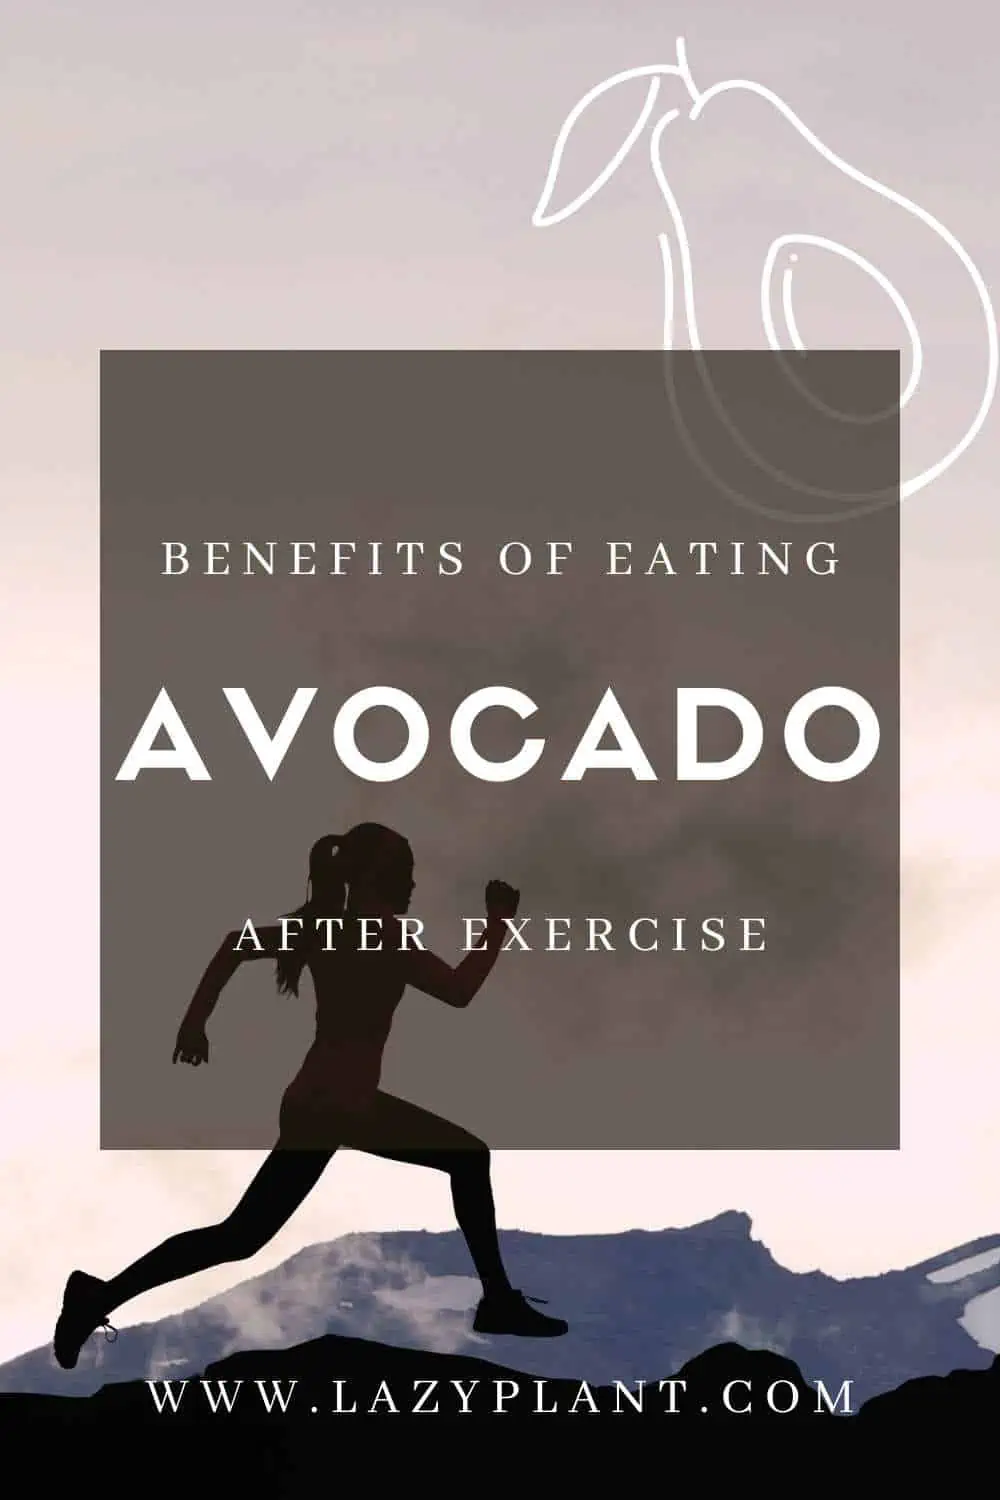 How to eat avocado for muscle recovery?